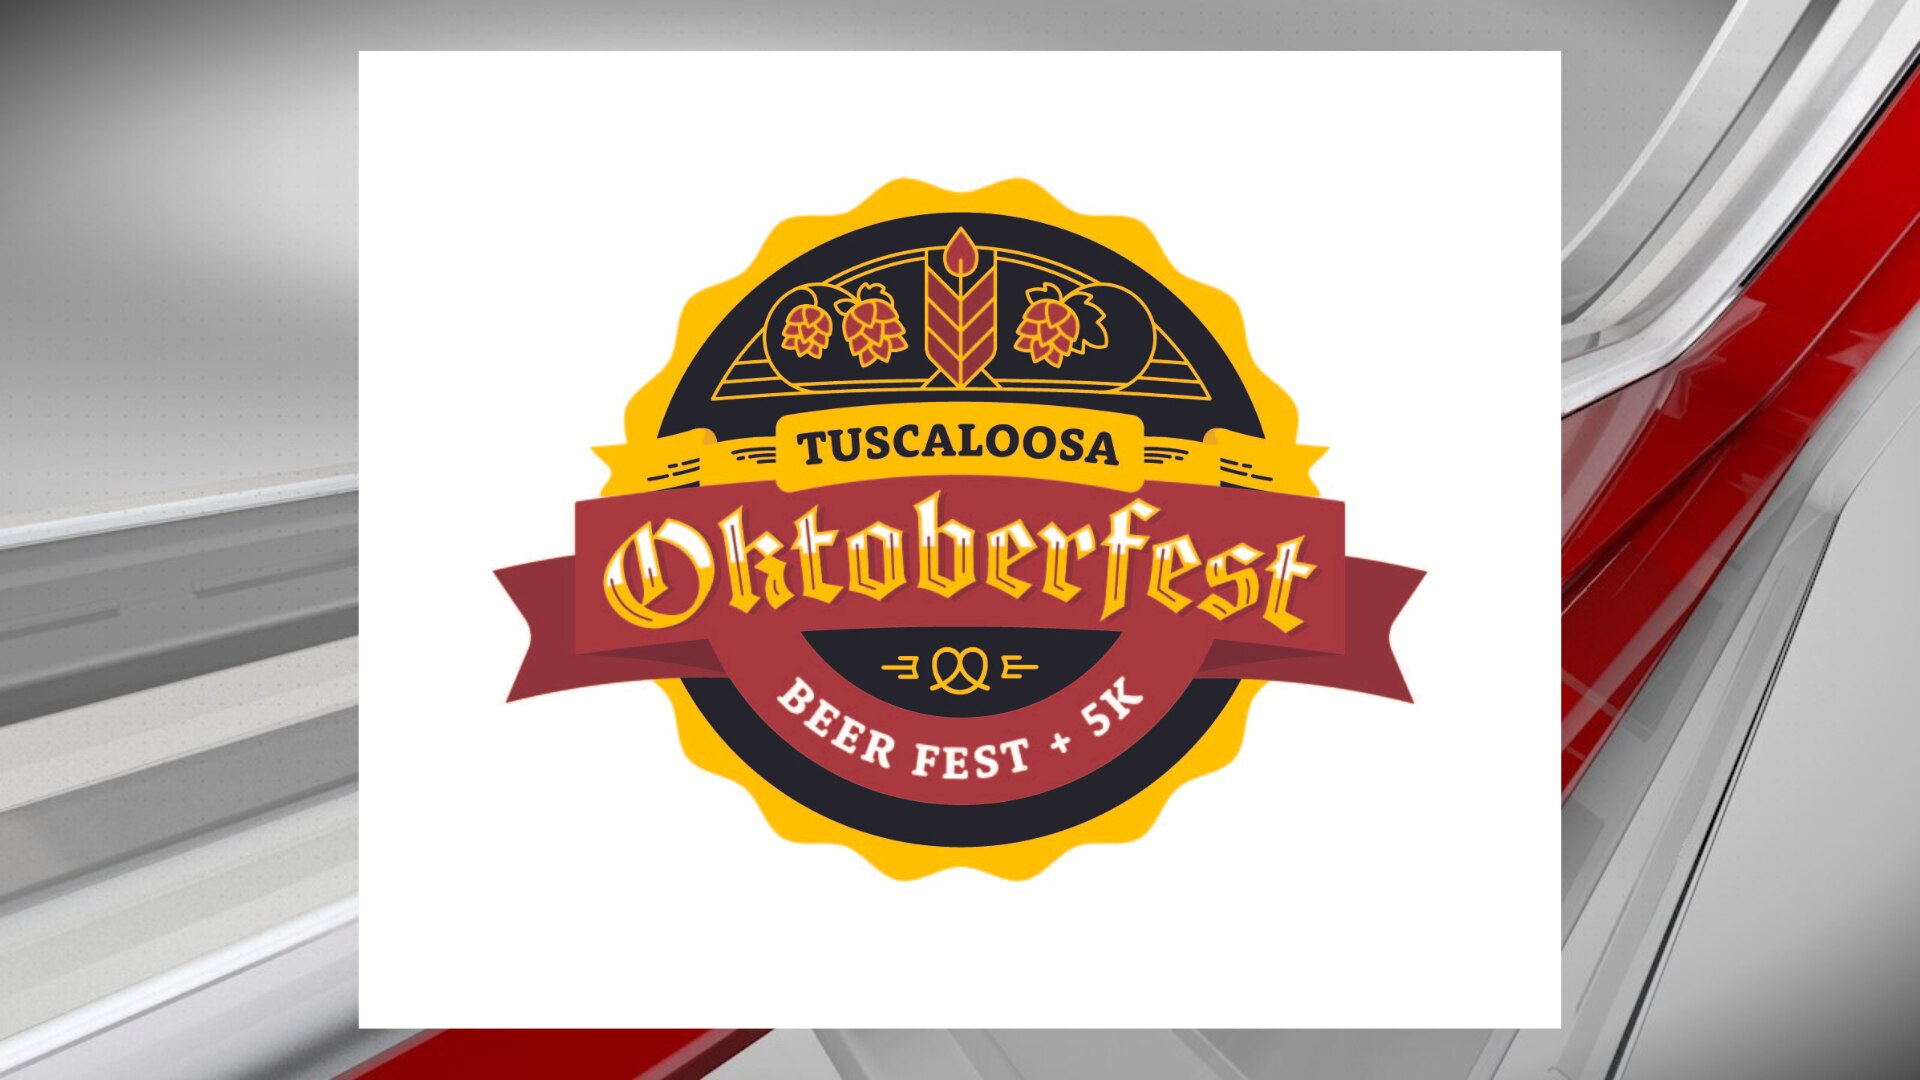 Germanthemed festival coming to Tuscaloosa